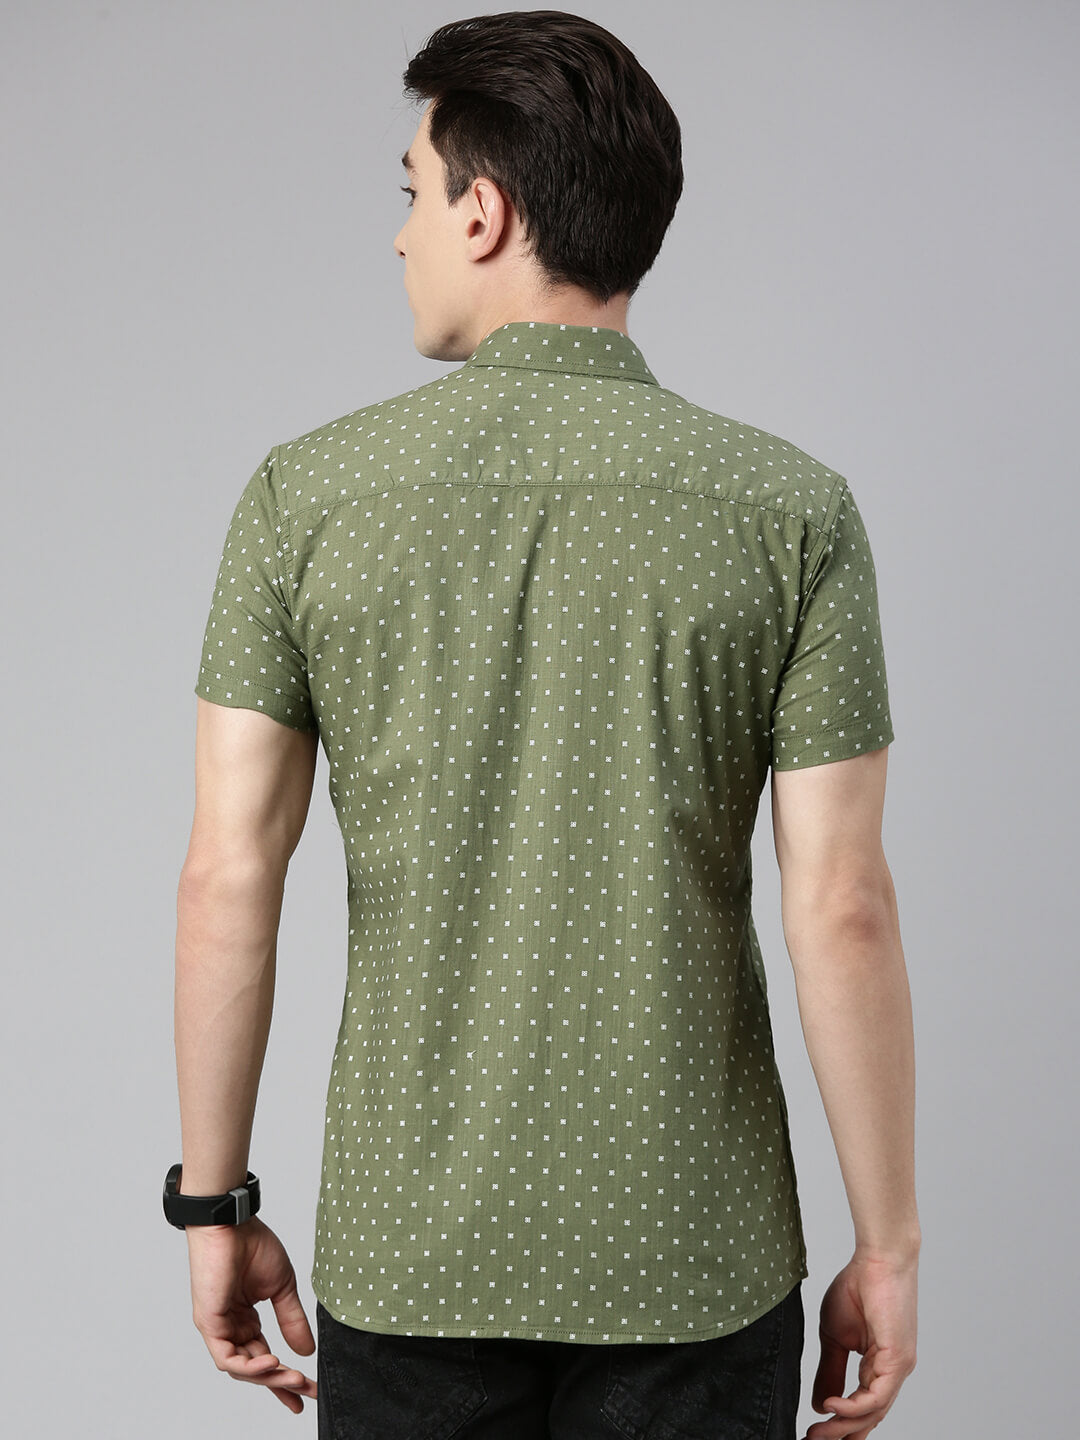 5thanfold Men's Pure Cotton Casual Half Sleeve Checkered Green Slim Fit Shirt